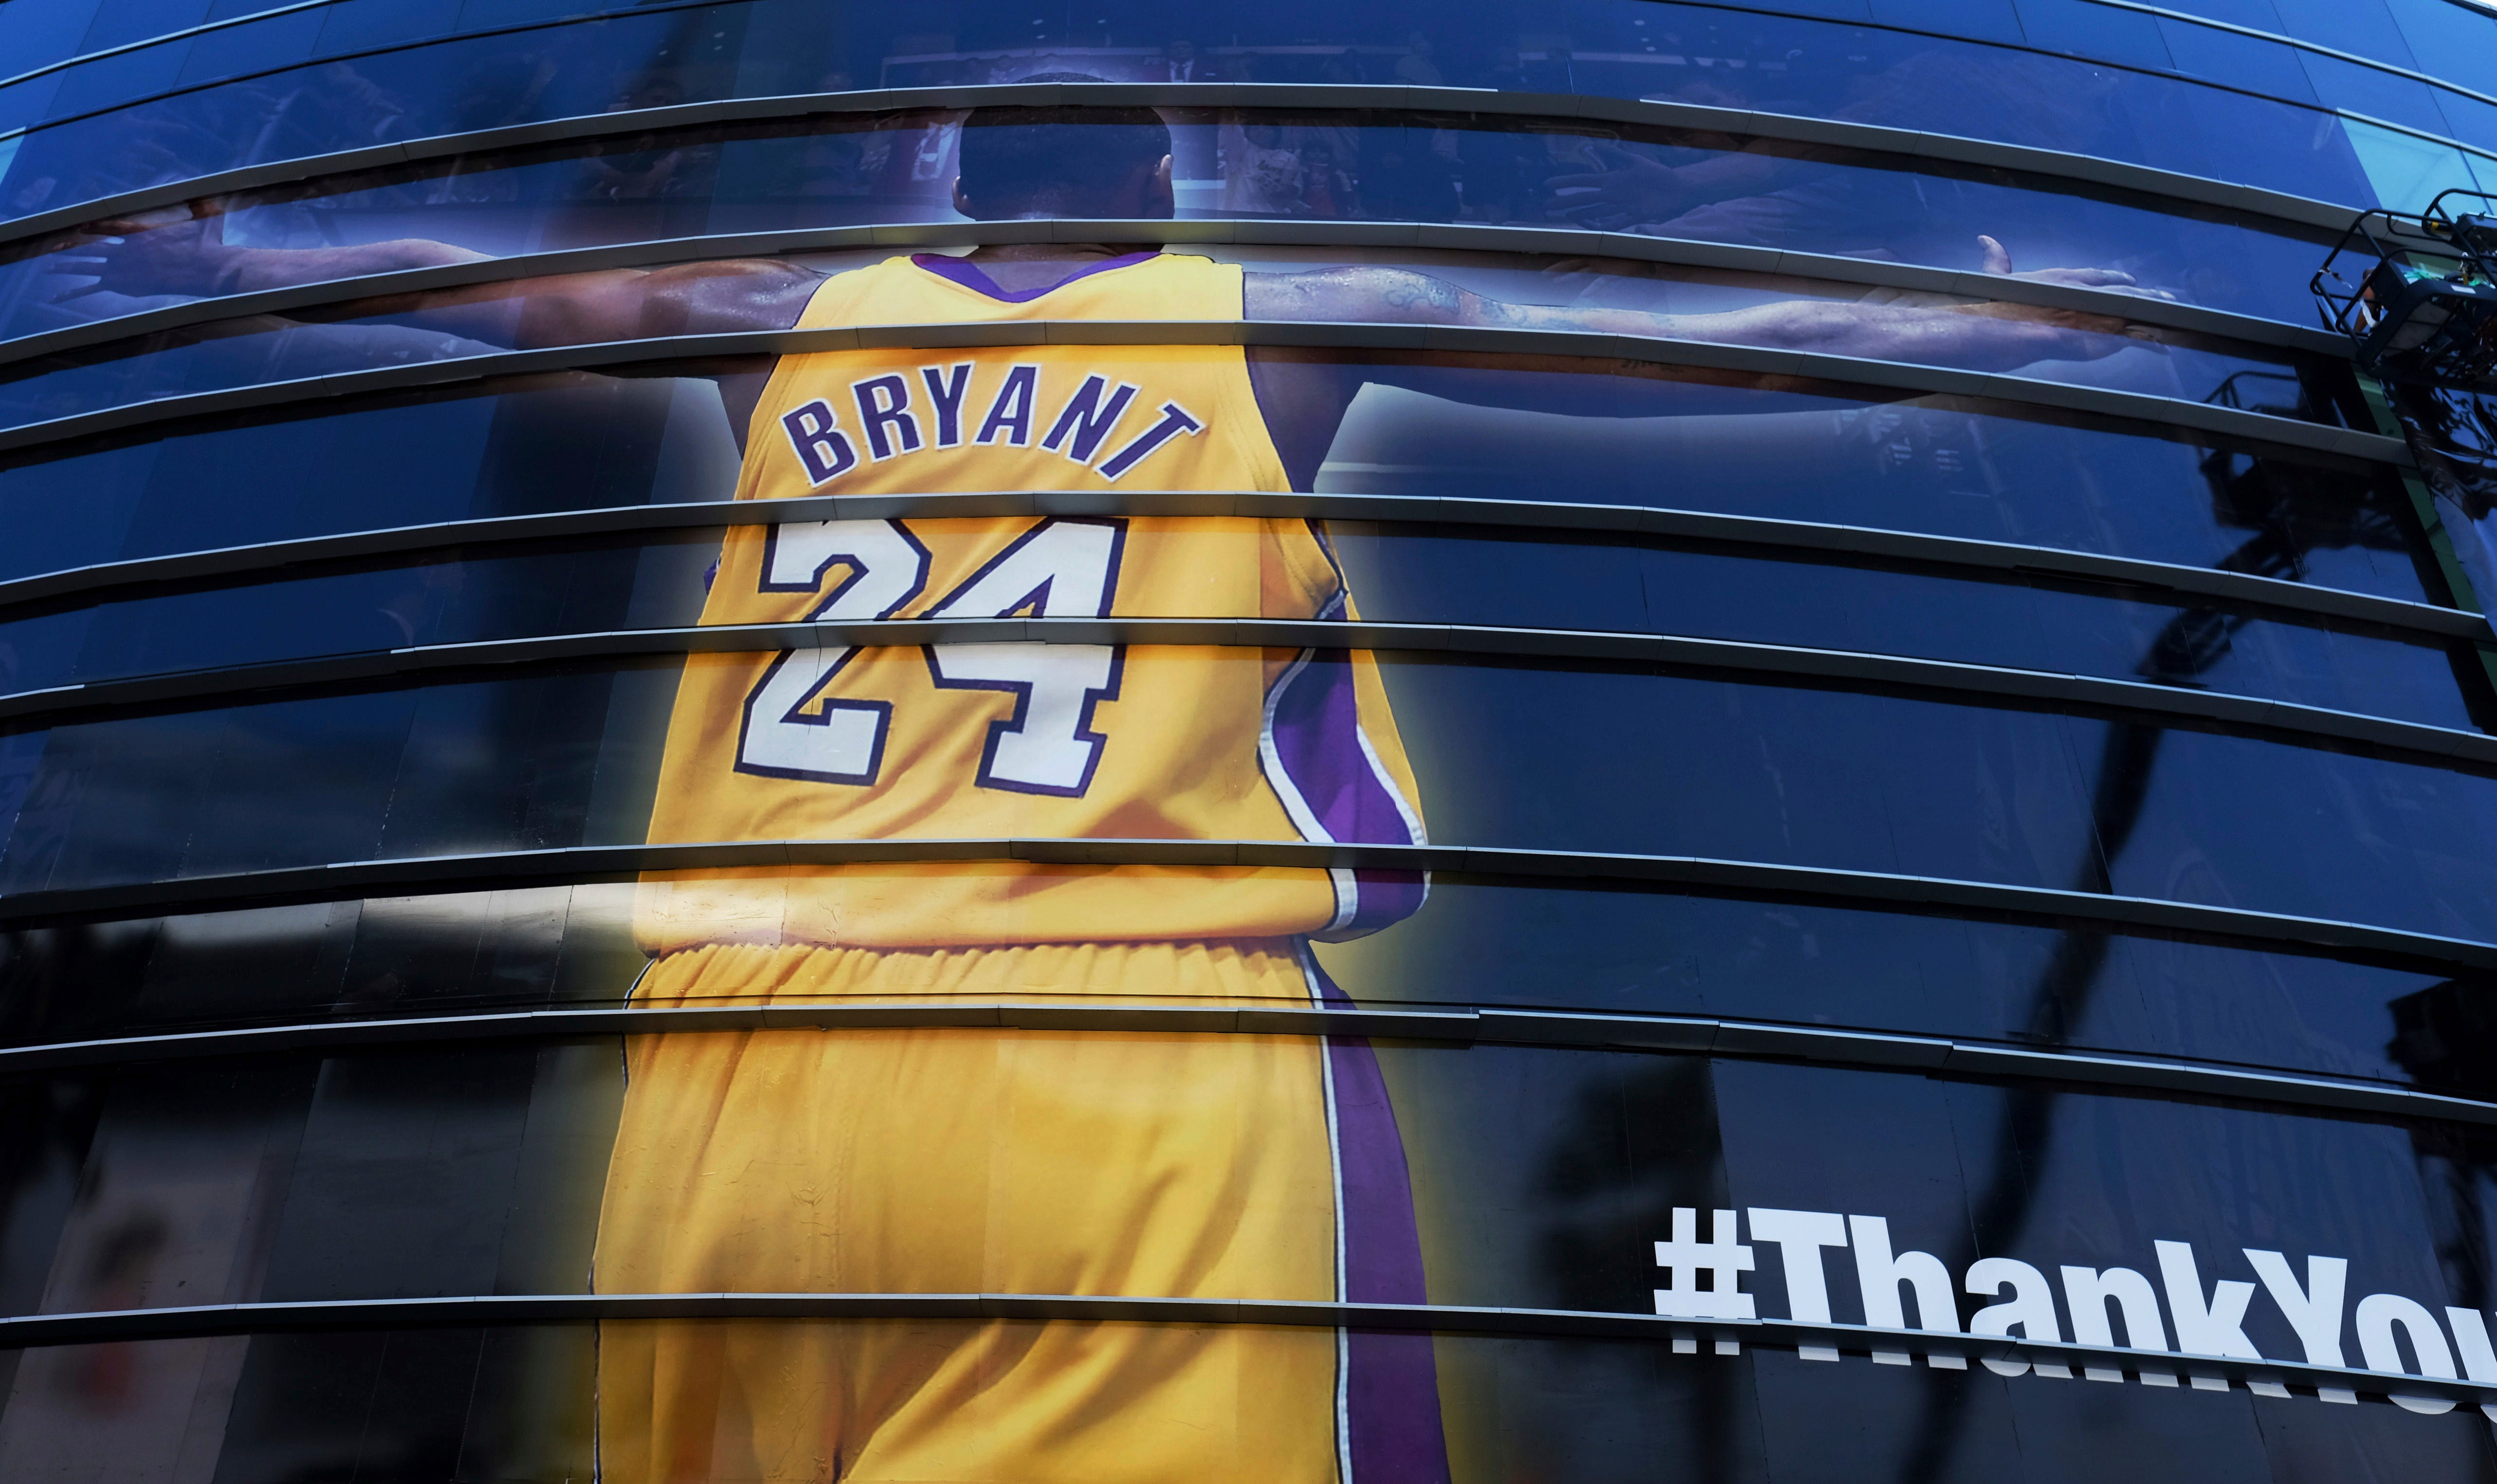 In April 2016, the Lakers unveiled a giant Kobe Bryant banner.